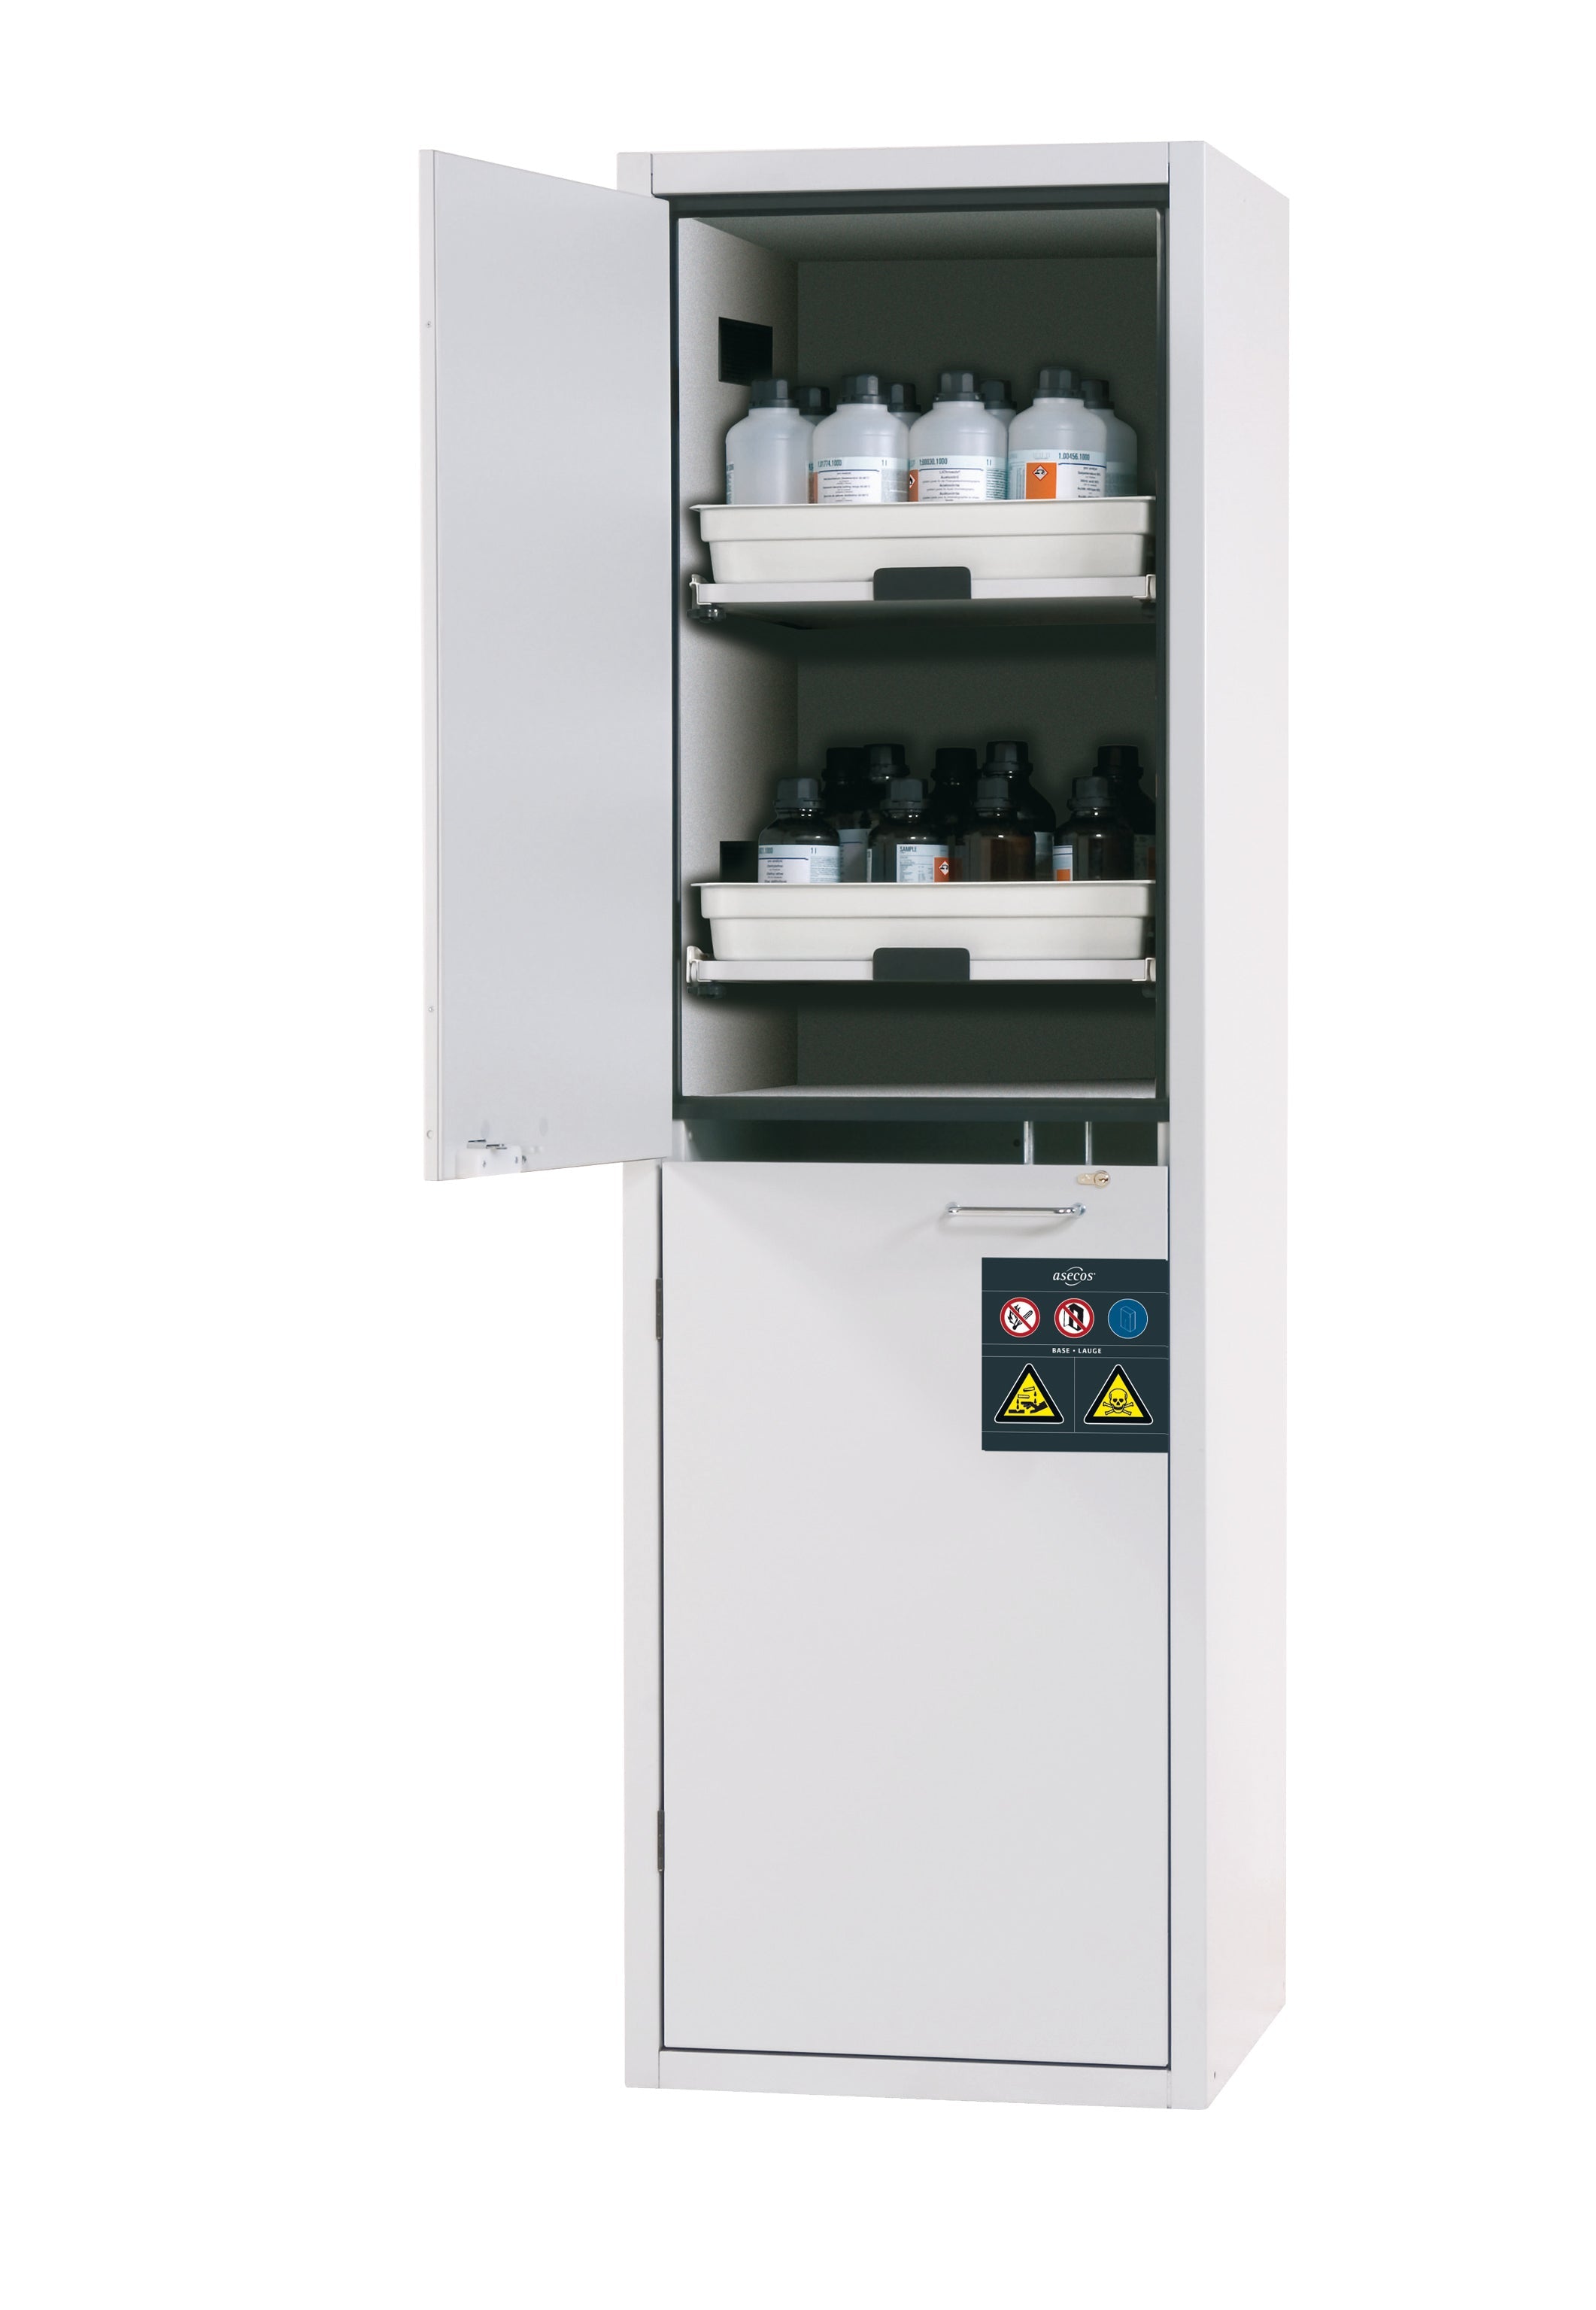 Acid and alkaline cabinet SL-CLASSIC model SL.196.060.MH in light gray RAL 7035 with 4x AbZ pull-out shelves (FP plate/polypropylene)